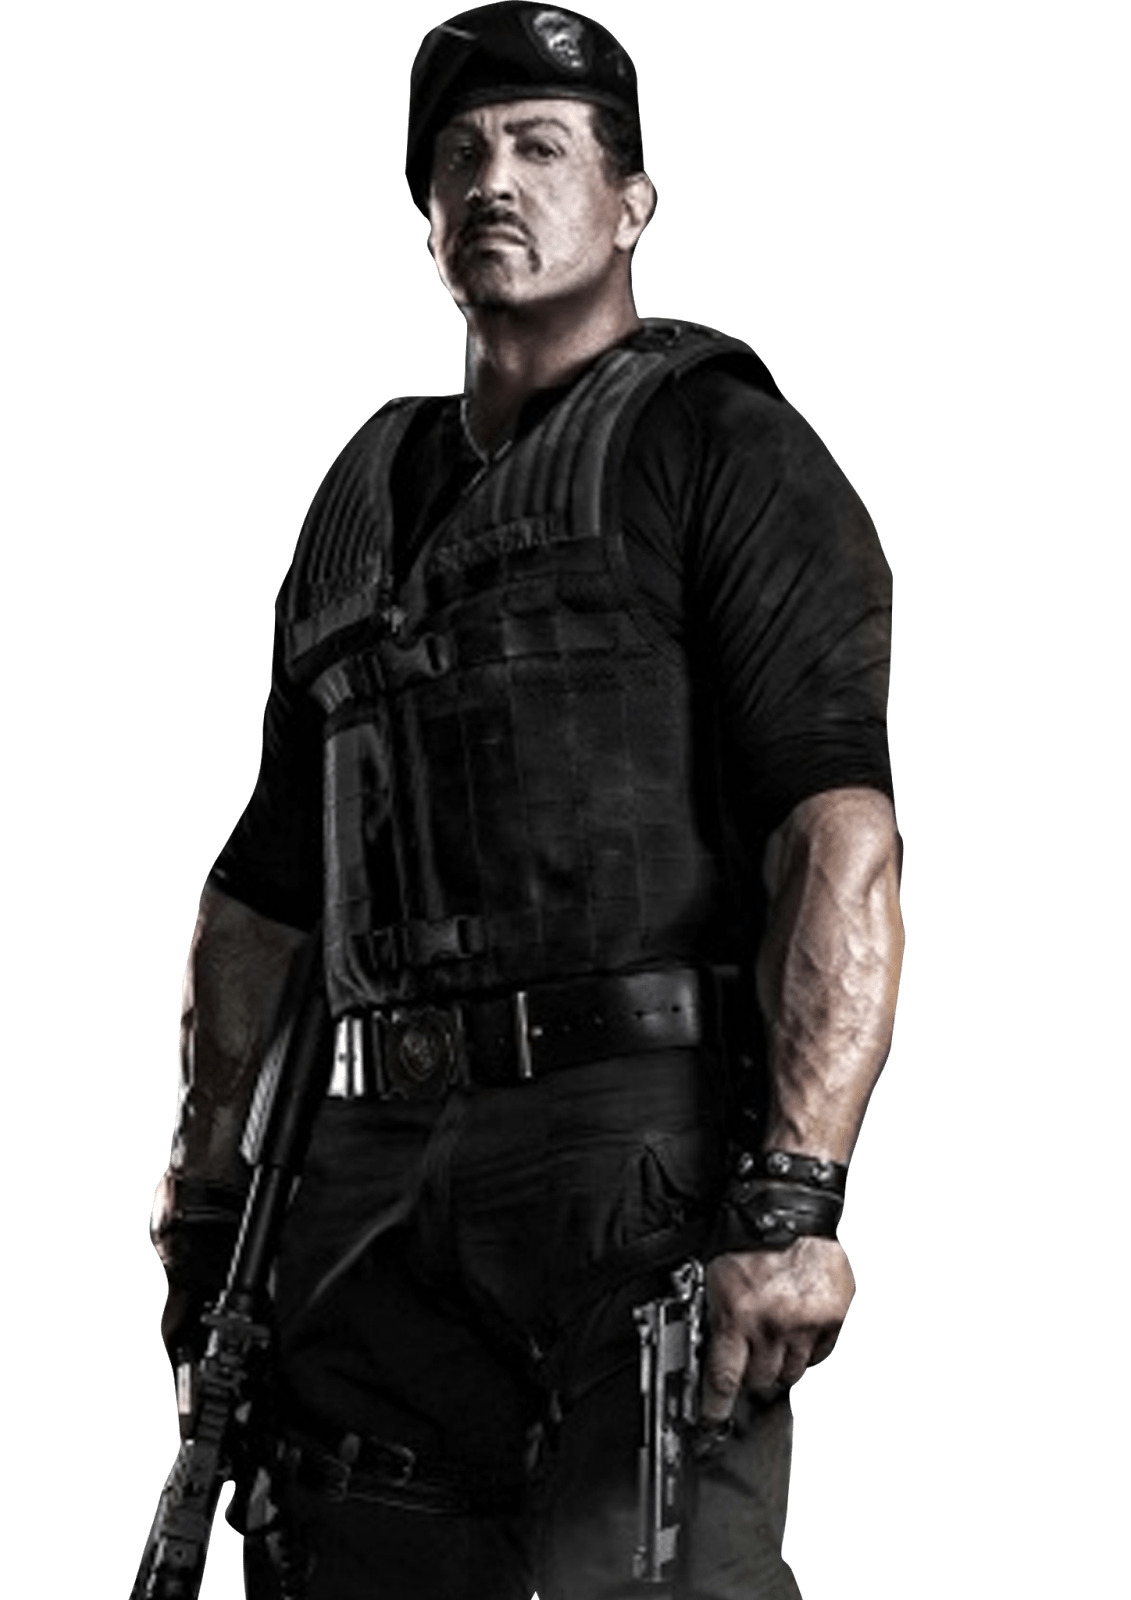 The Expendables Sylvester Stallone.PNG icons